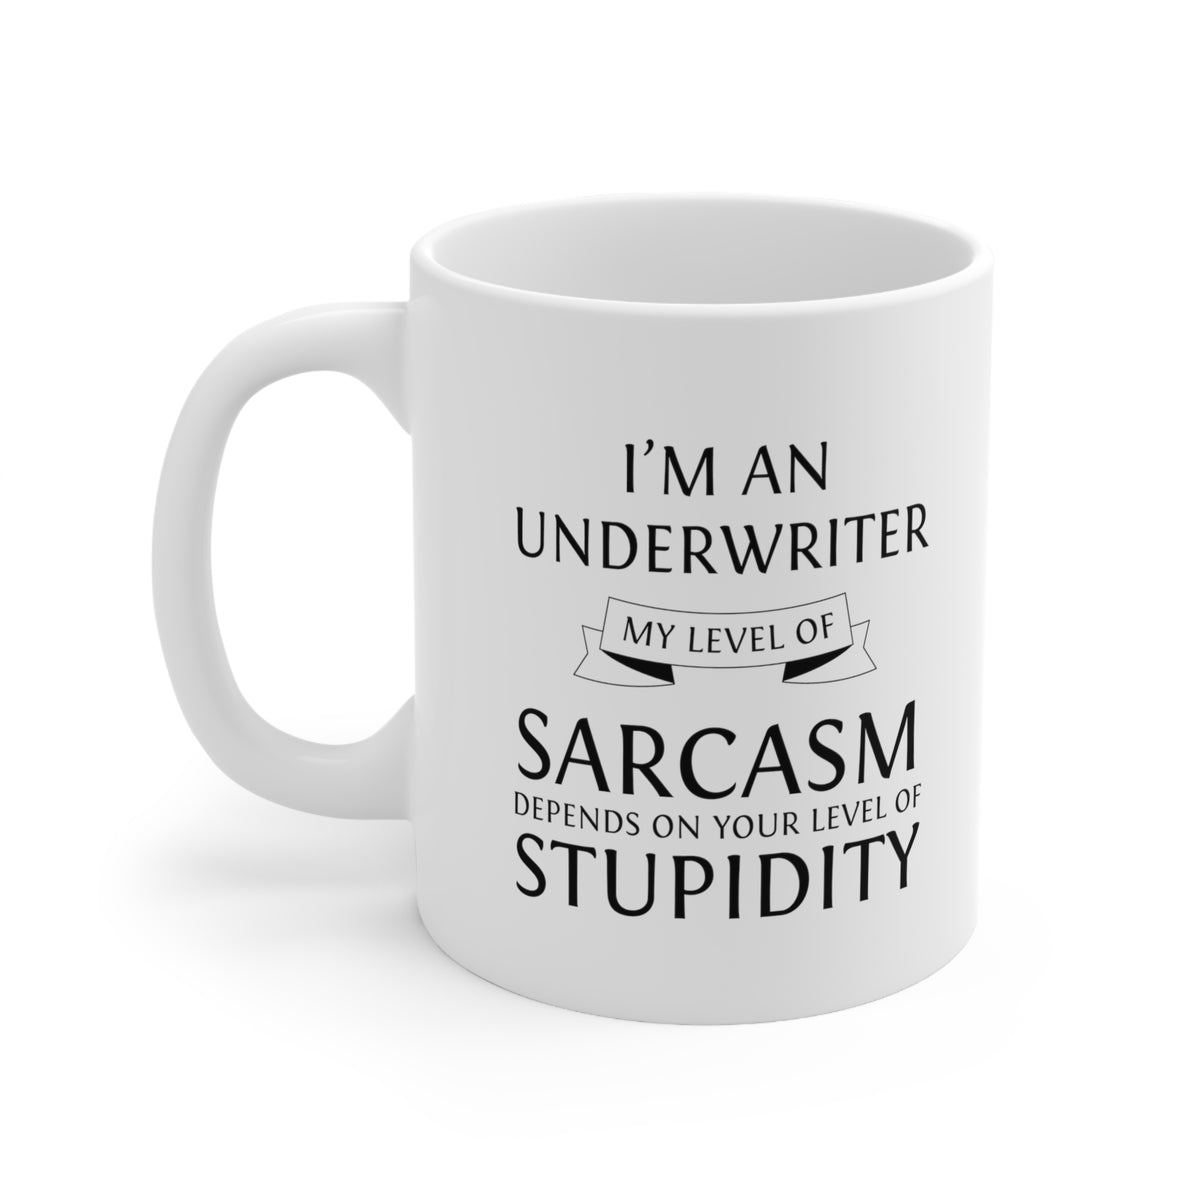 Underwriter Coffee Mug - My Level Of Sarcasm - Unique Funny Inspirational Gift for Men and Women